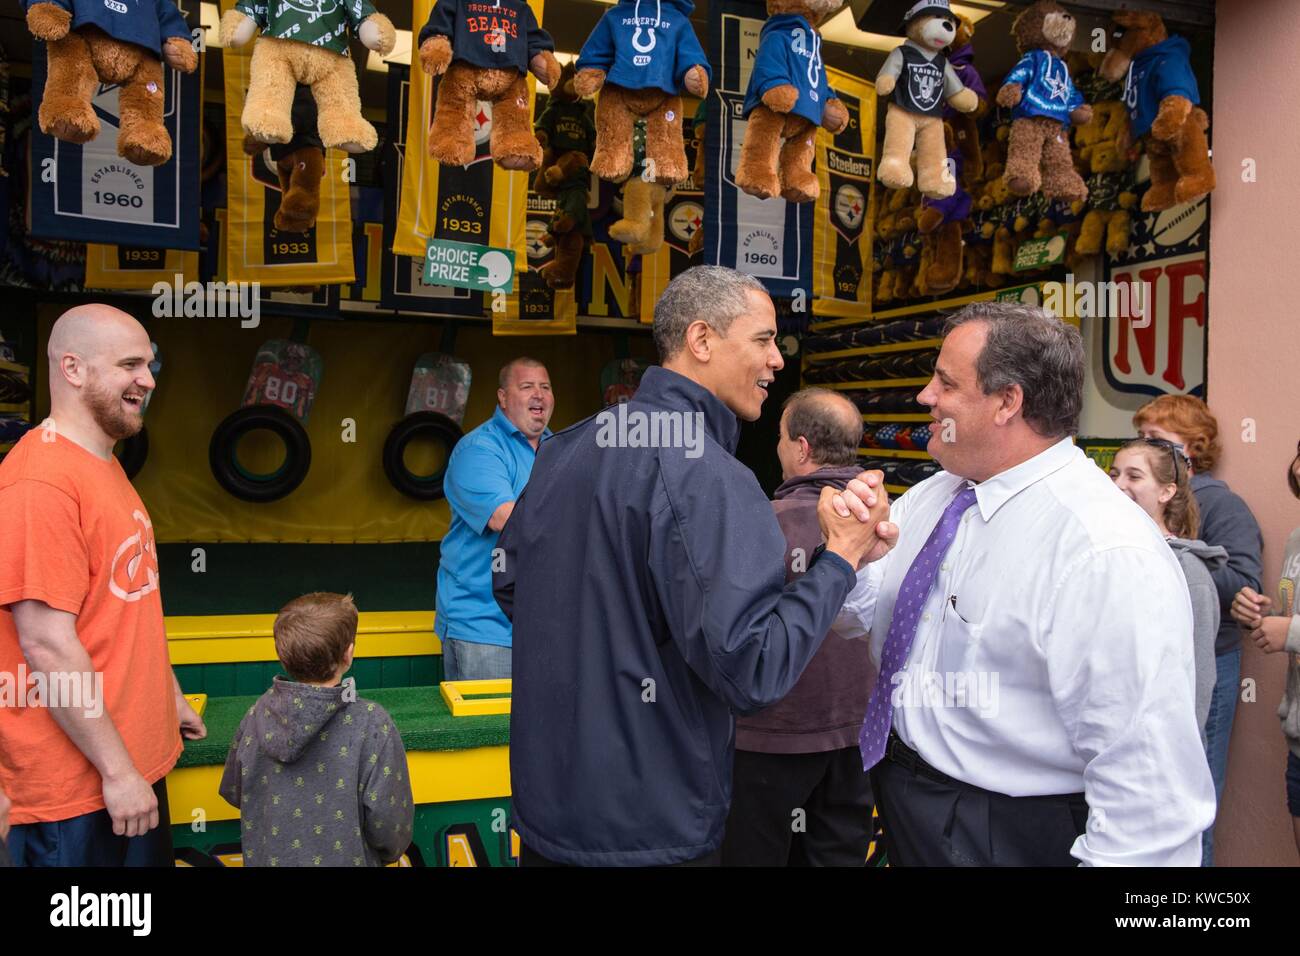 President Obama and Governor Chris Christie playing Arcade Game, 'Touch Down Fever.' They were promoting tourism along the Point Pleasant Boardwalk, helping the New Jersey shore recover from Hurricane Sandy. May 28, 2013. (BSLOC_2015_13_213) Stock Photo